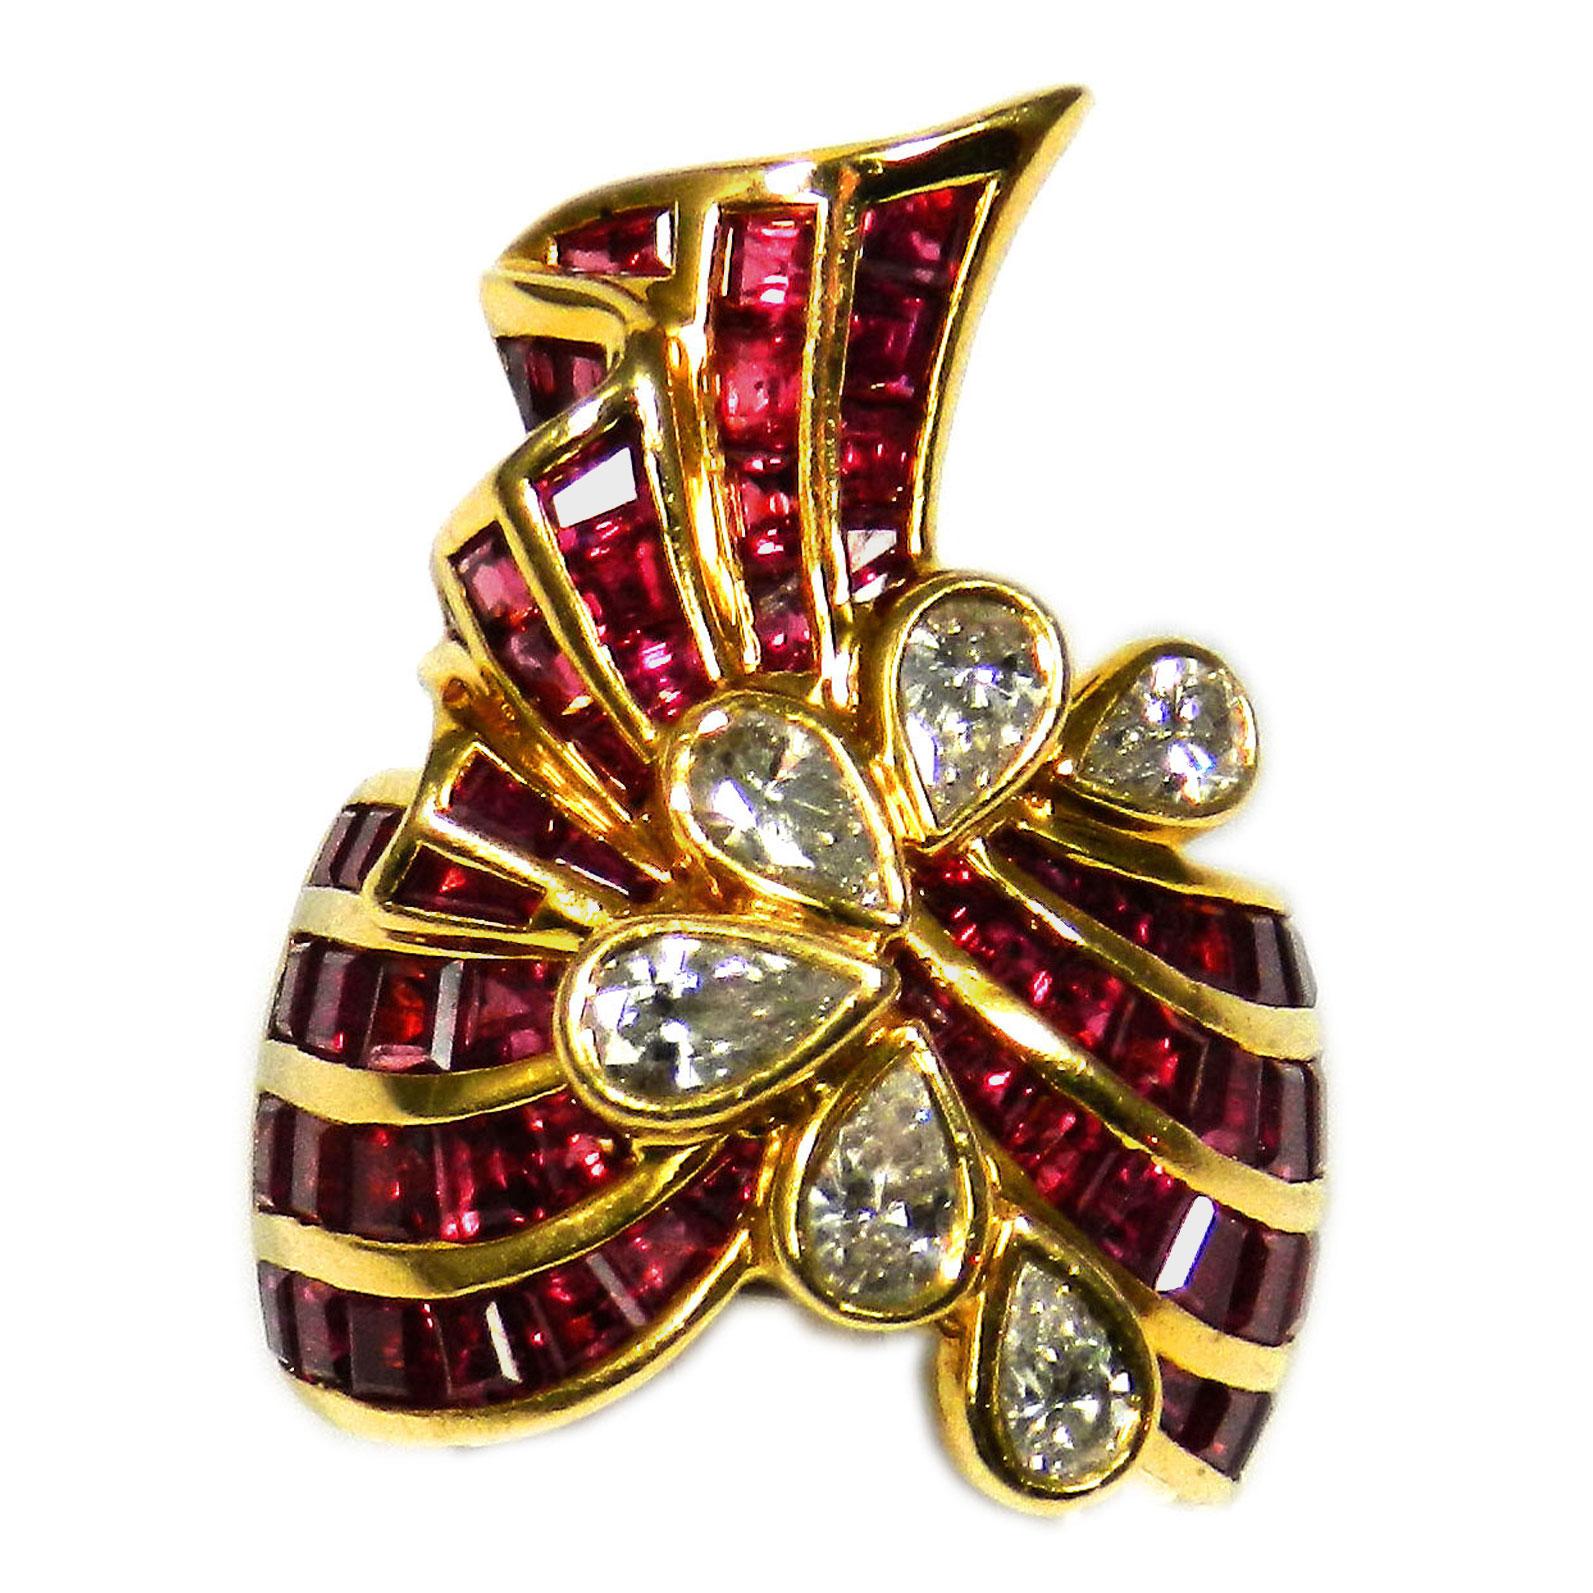 Retro 18K gold 4 carat ruby ​​and diamond cocktail ring , circa 1940

Very distinctive cocktail ring, designed as a winding loop, completely set with ruby ​​squares totaling 4 ct and accentuated with six pear-shaped diamonds of 0.9 ct in total, set